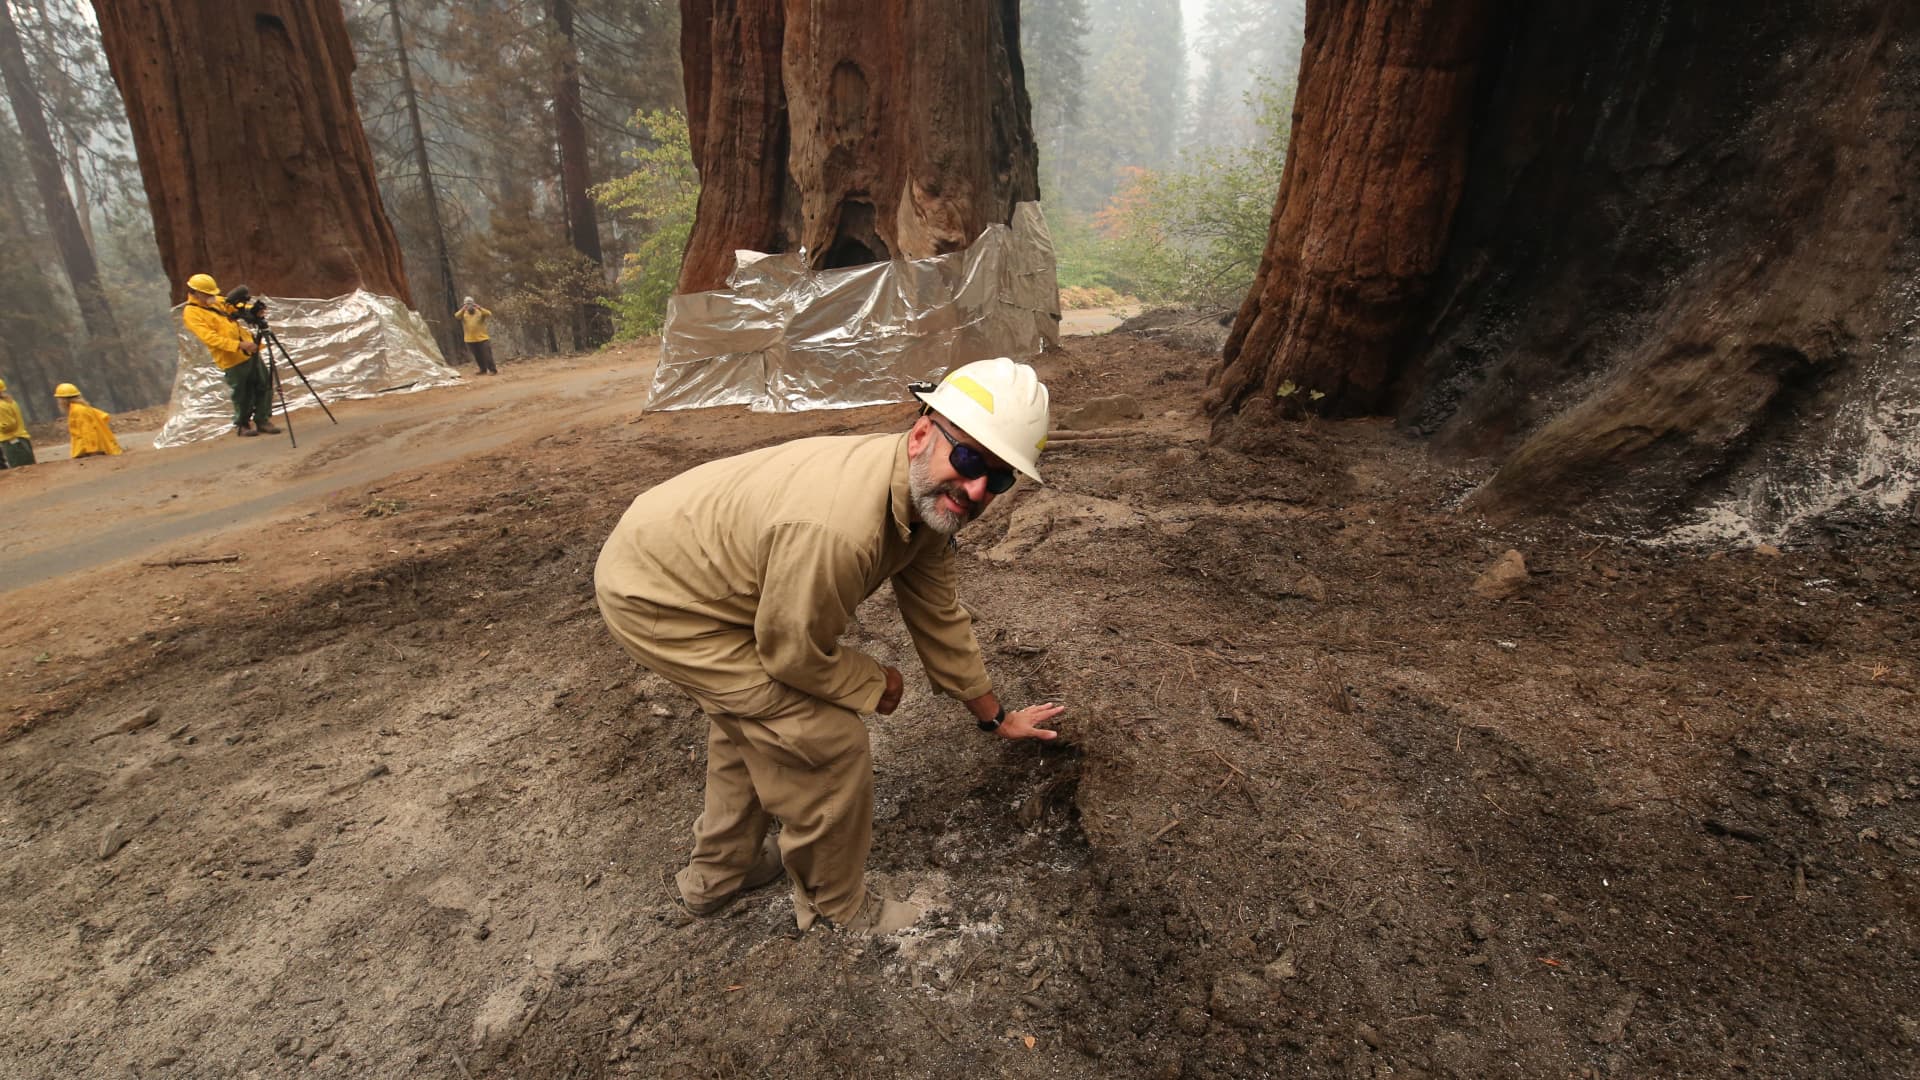 Ed Christopher, deputy fire director at the U.S. Fish and Wildlife Service, checks the residual heat near the Four Guardsmen at Sequoia National Park, Sept. 22, 2021.